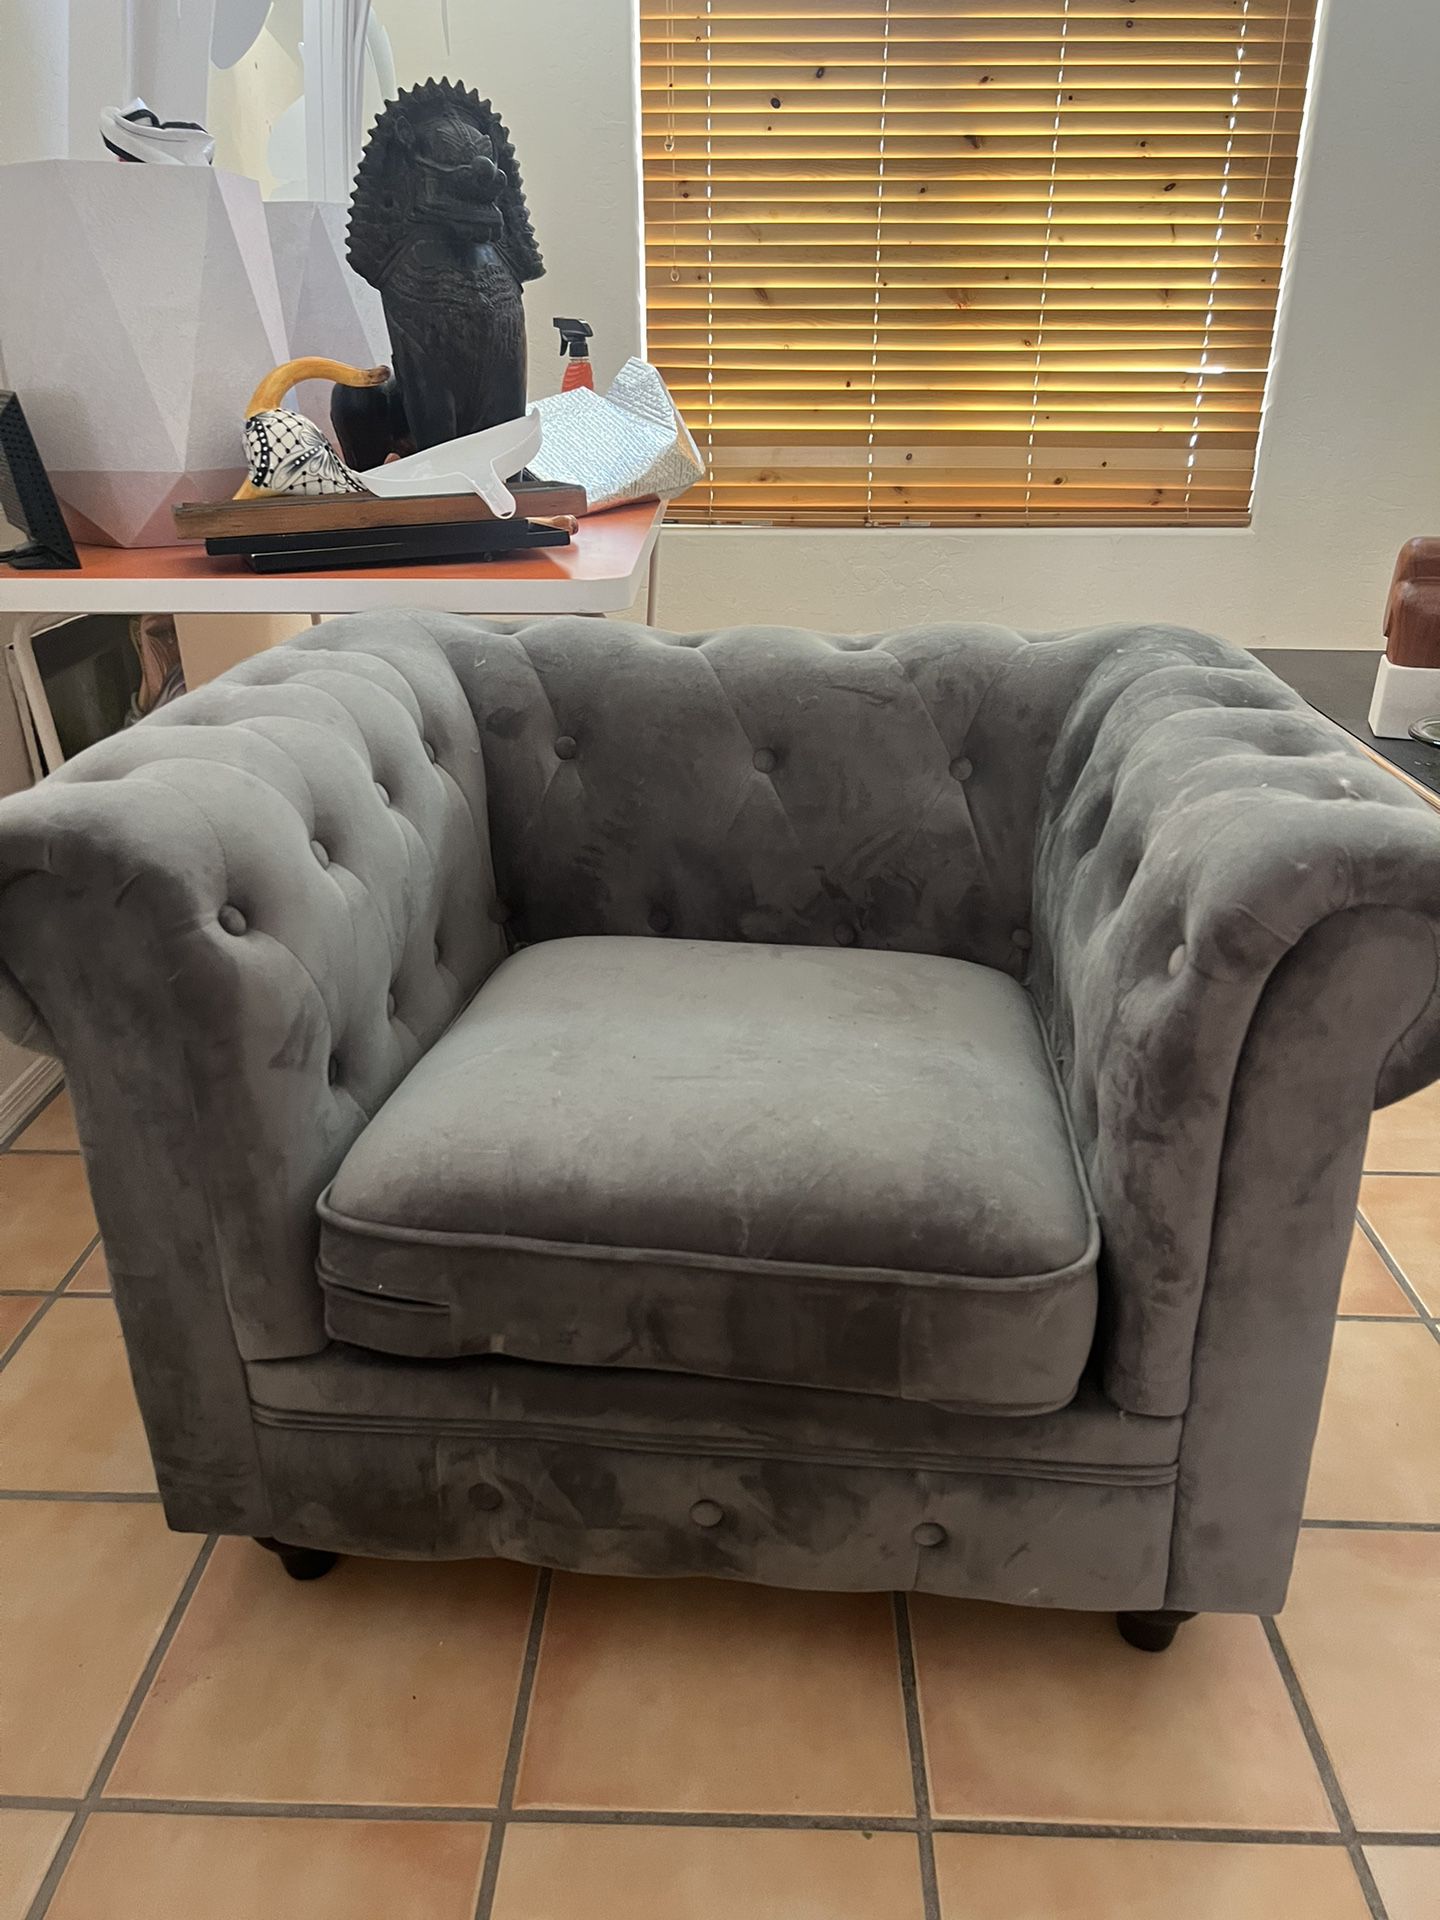 Large Cushioned Chair